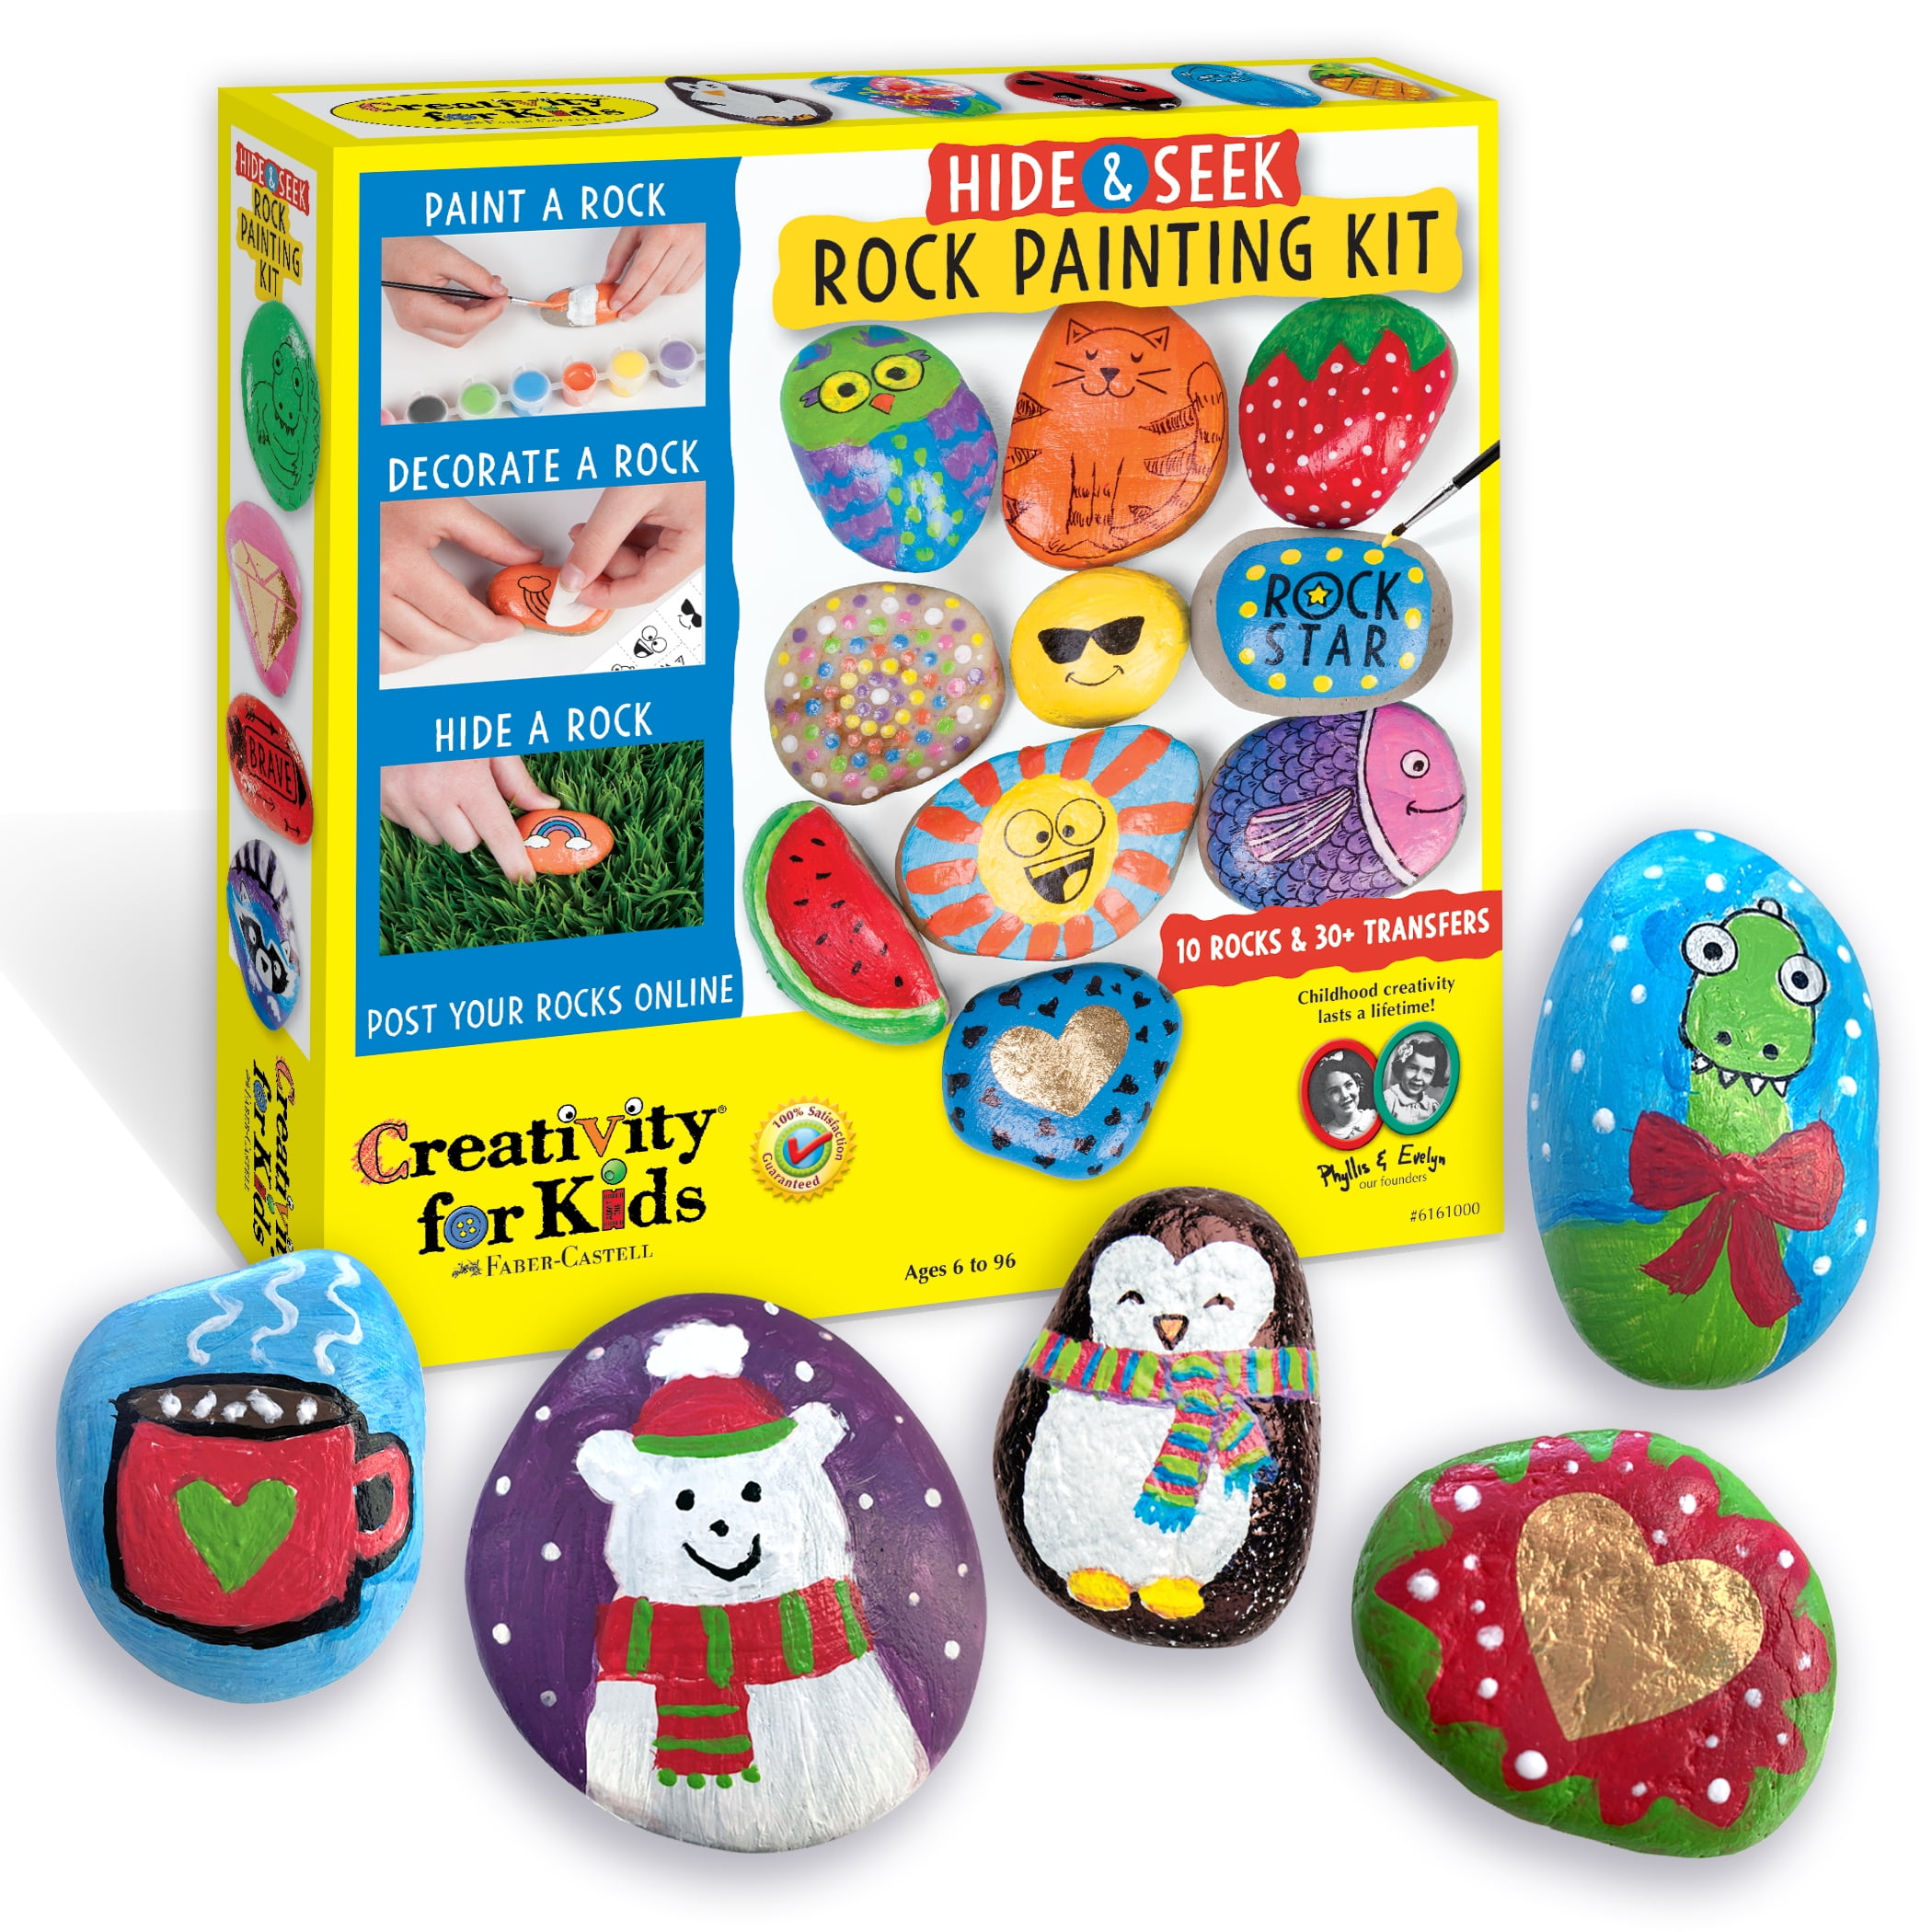 Kindy Ecobaby 145-Piece Art Set with Lucky Dip Gift - Creative Fun for Kids